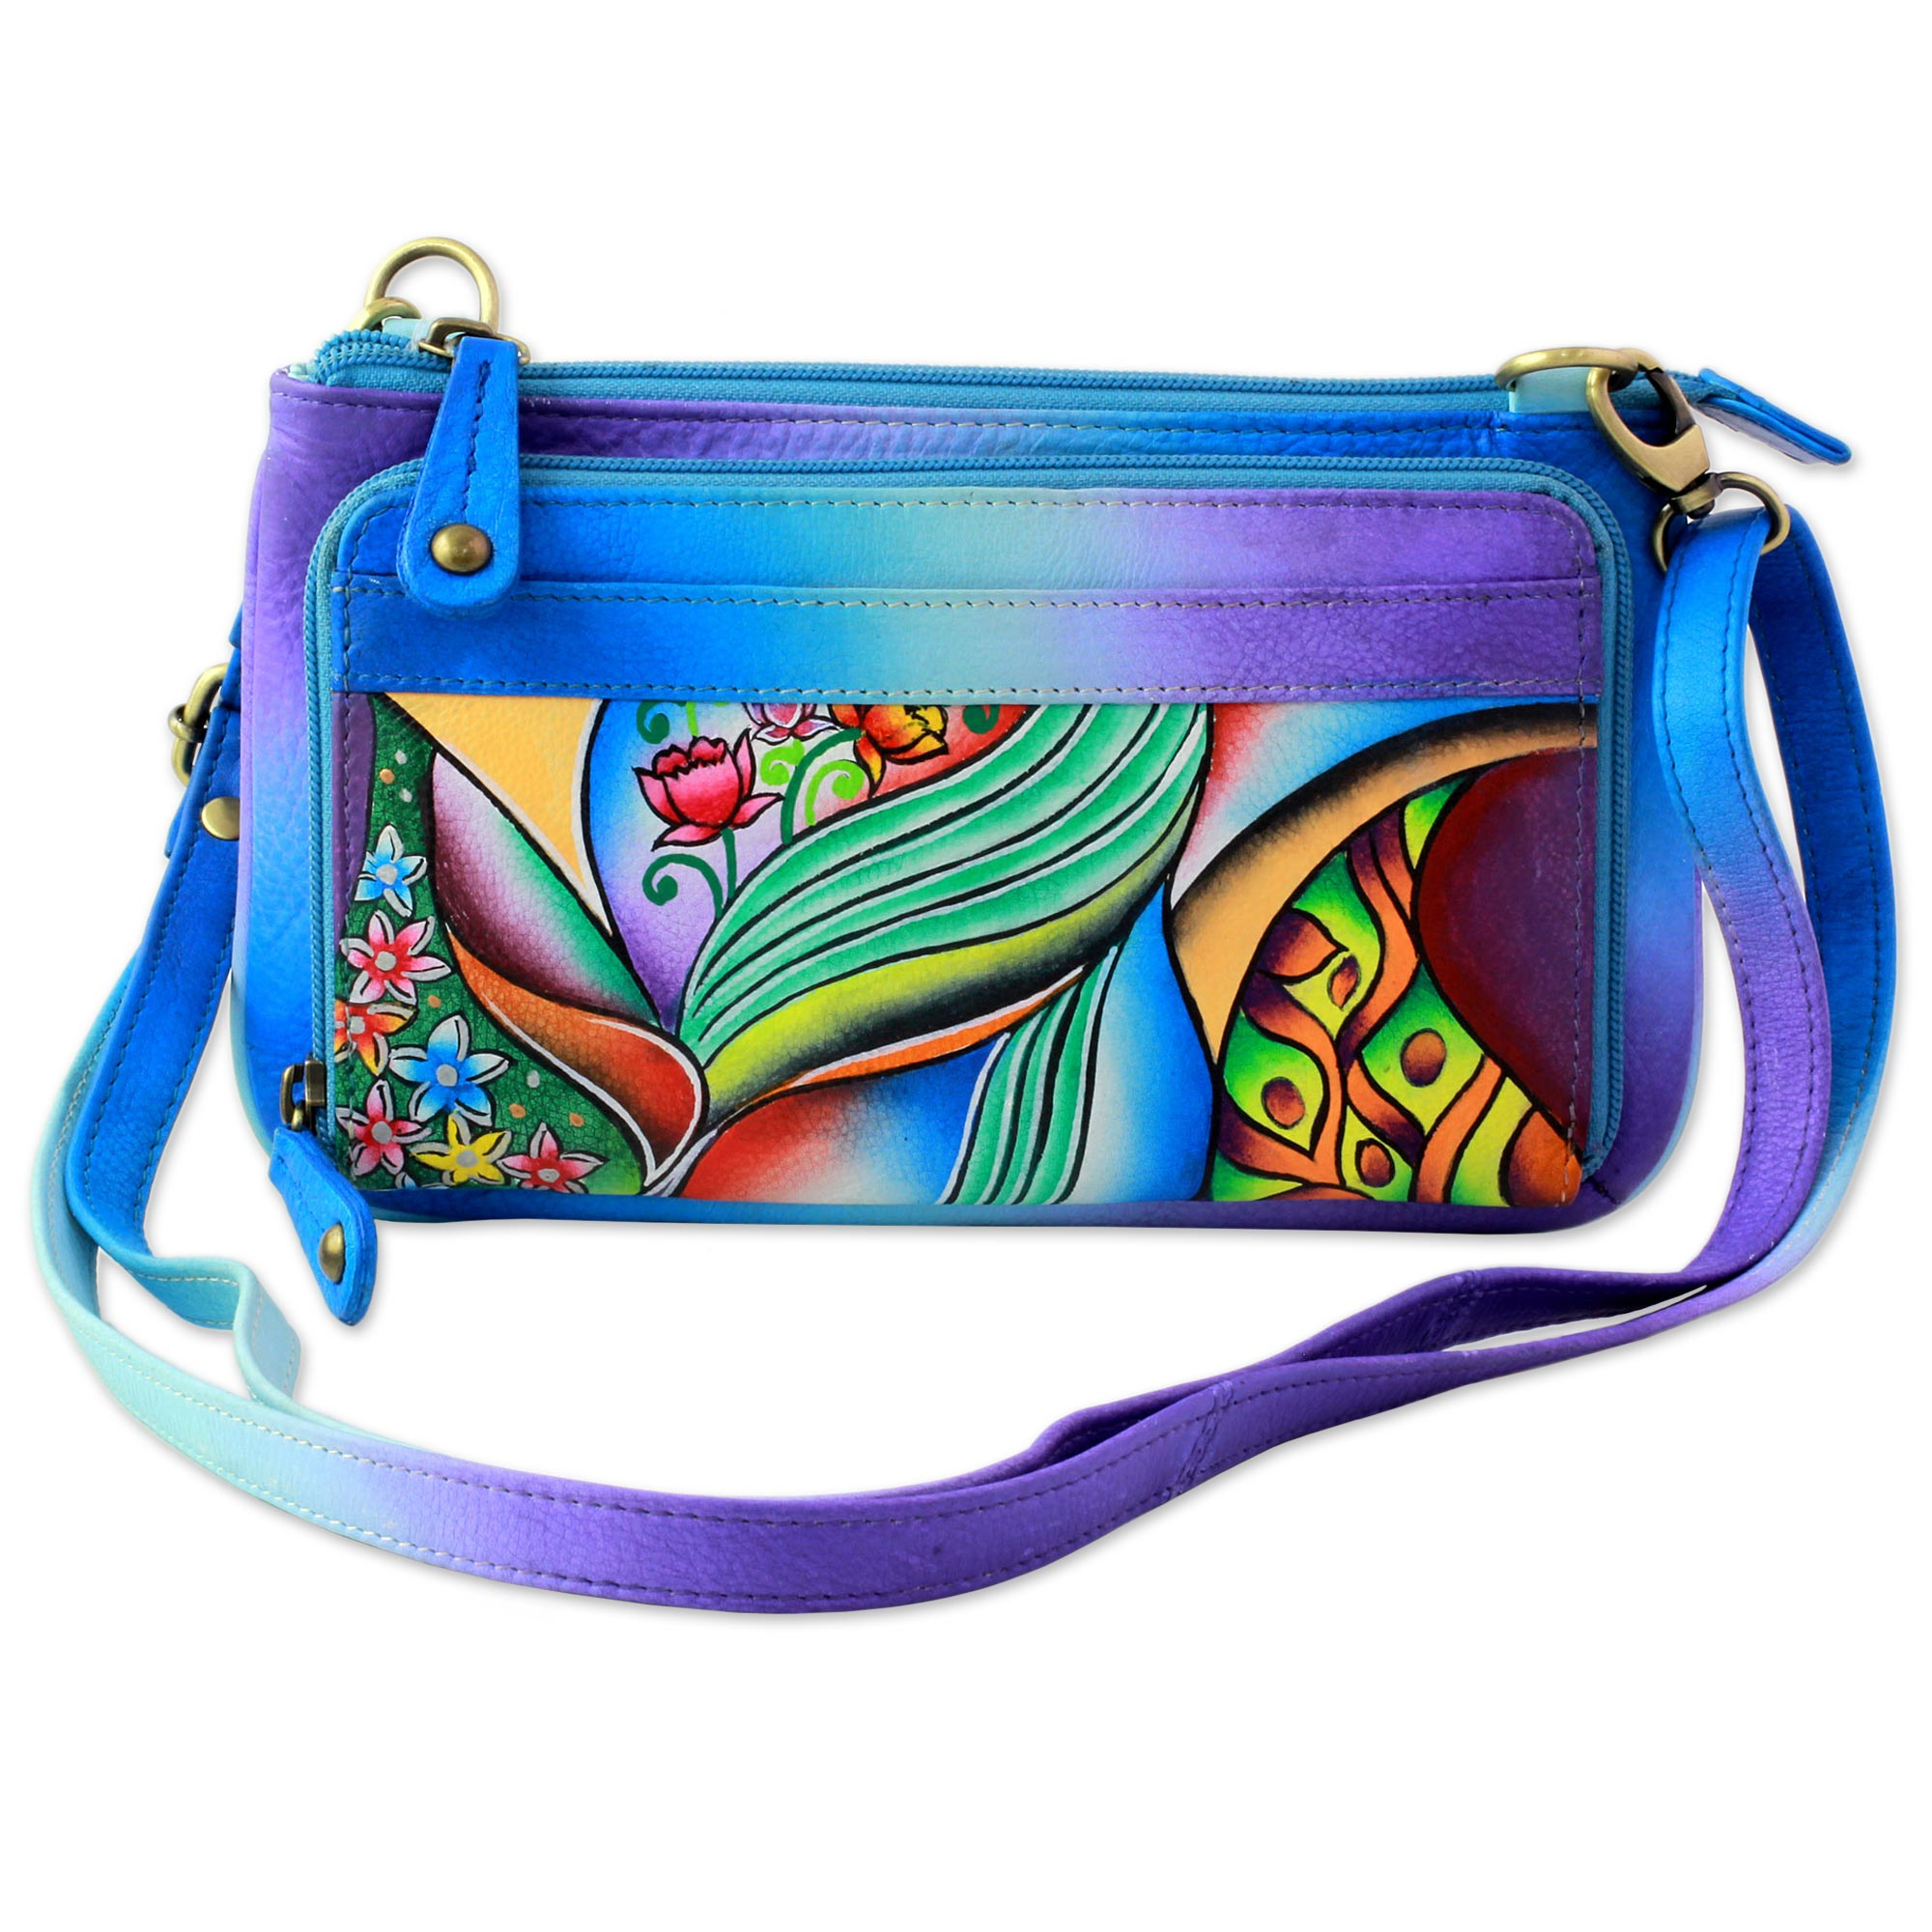 hand painted bags and purses